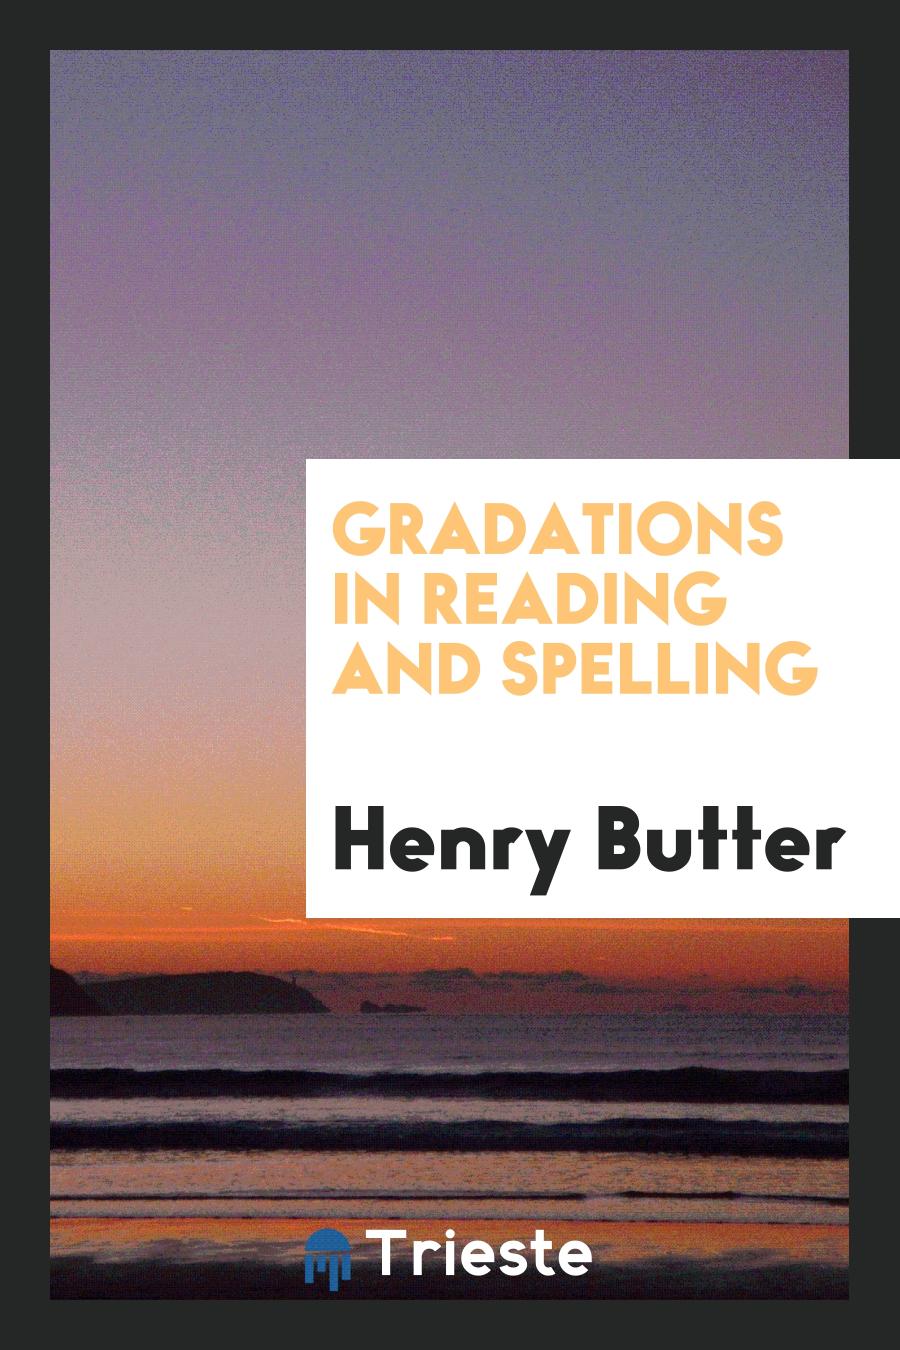 Gradations in Reading and Spelling